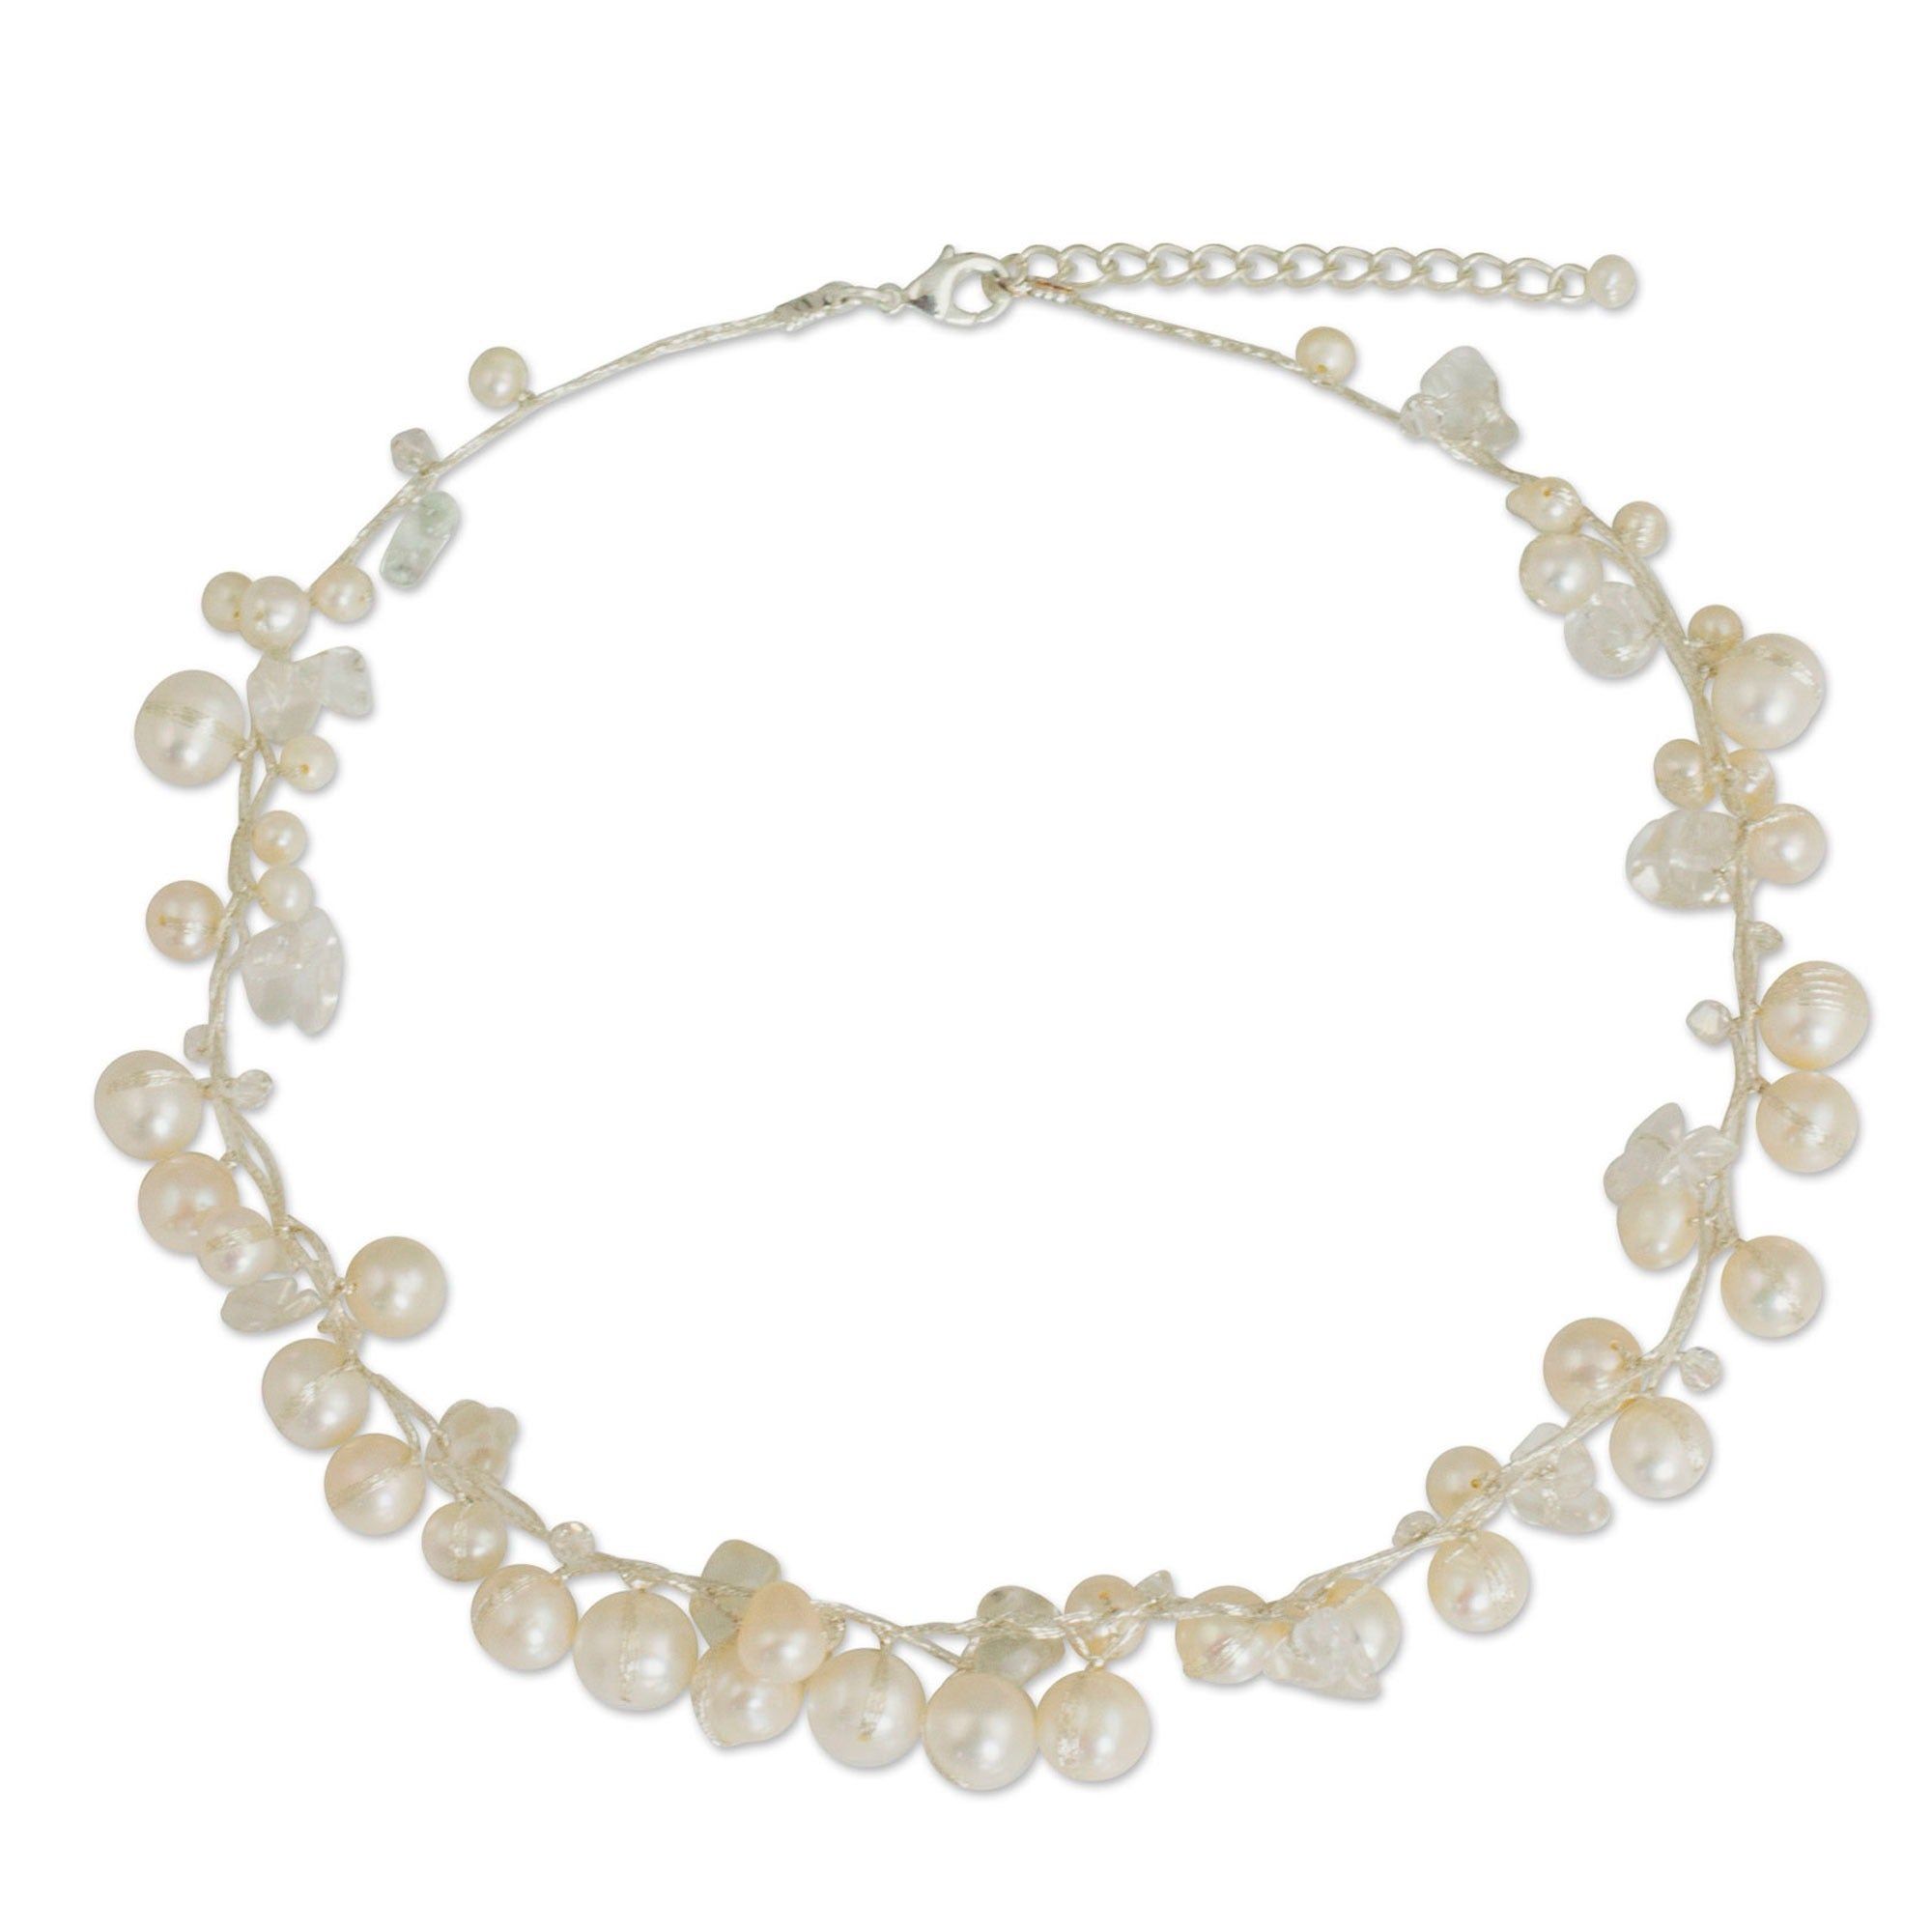 River Of Snow White Freshwater Pearls And Crystal Beads On Silk Thread  Fluid Adjustable Length Womens Choker Necklace (thailand) Pertaining To Most Up To Date Freshwater Cultured Pearls & Beads Necklaces (View 19 of 25)